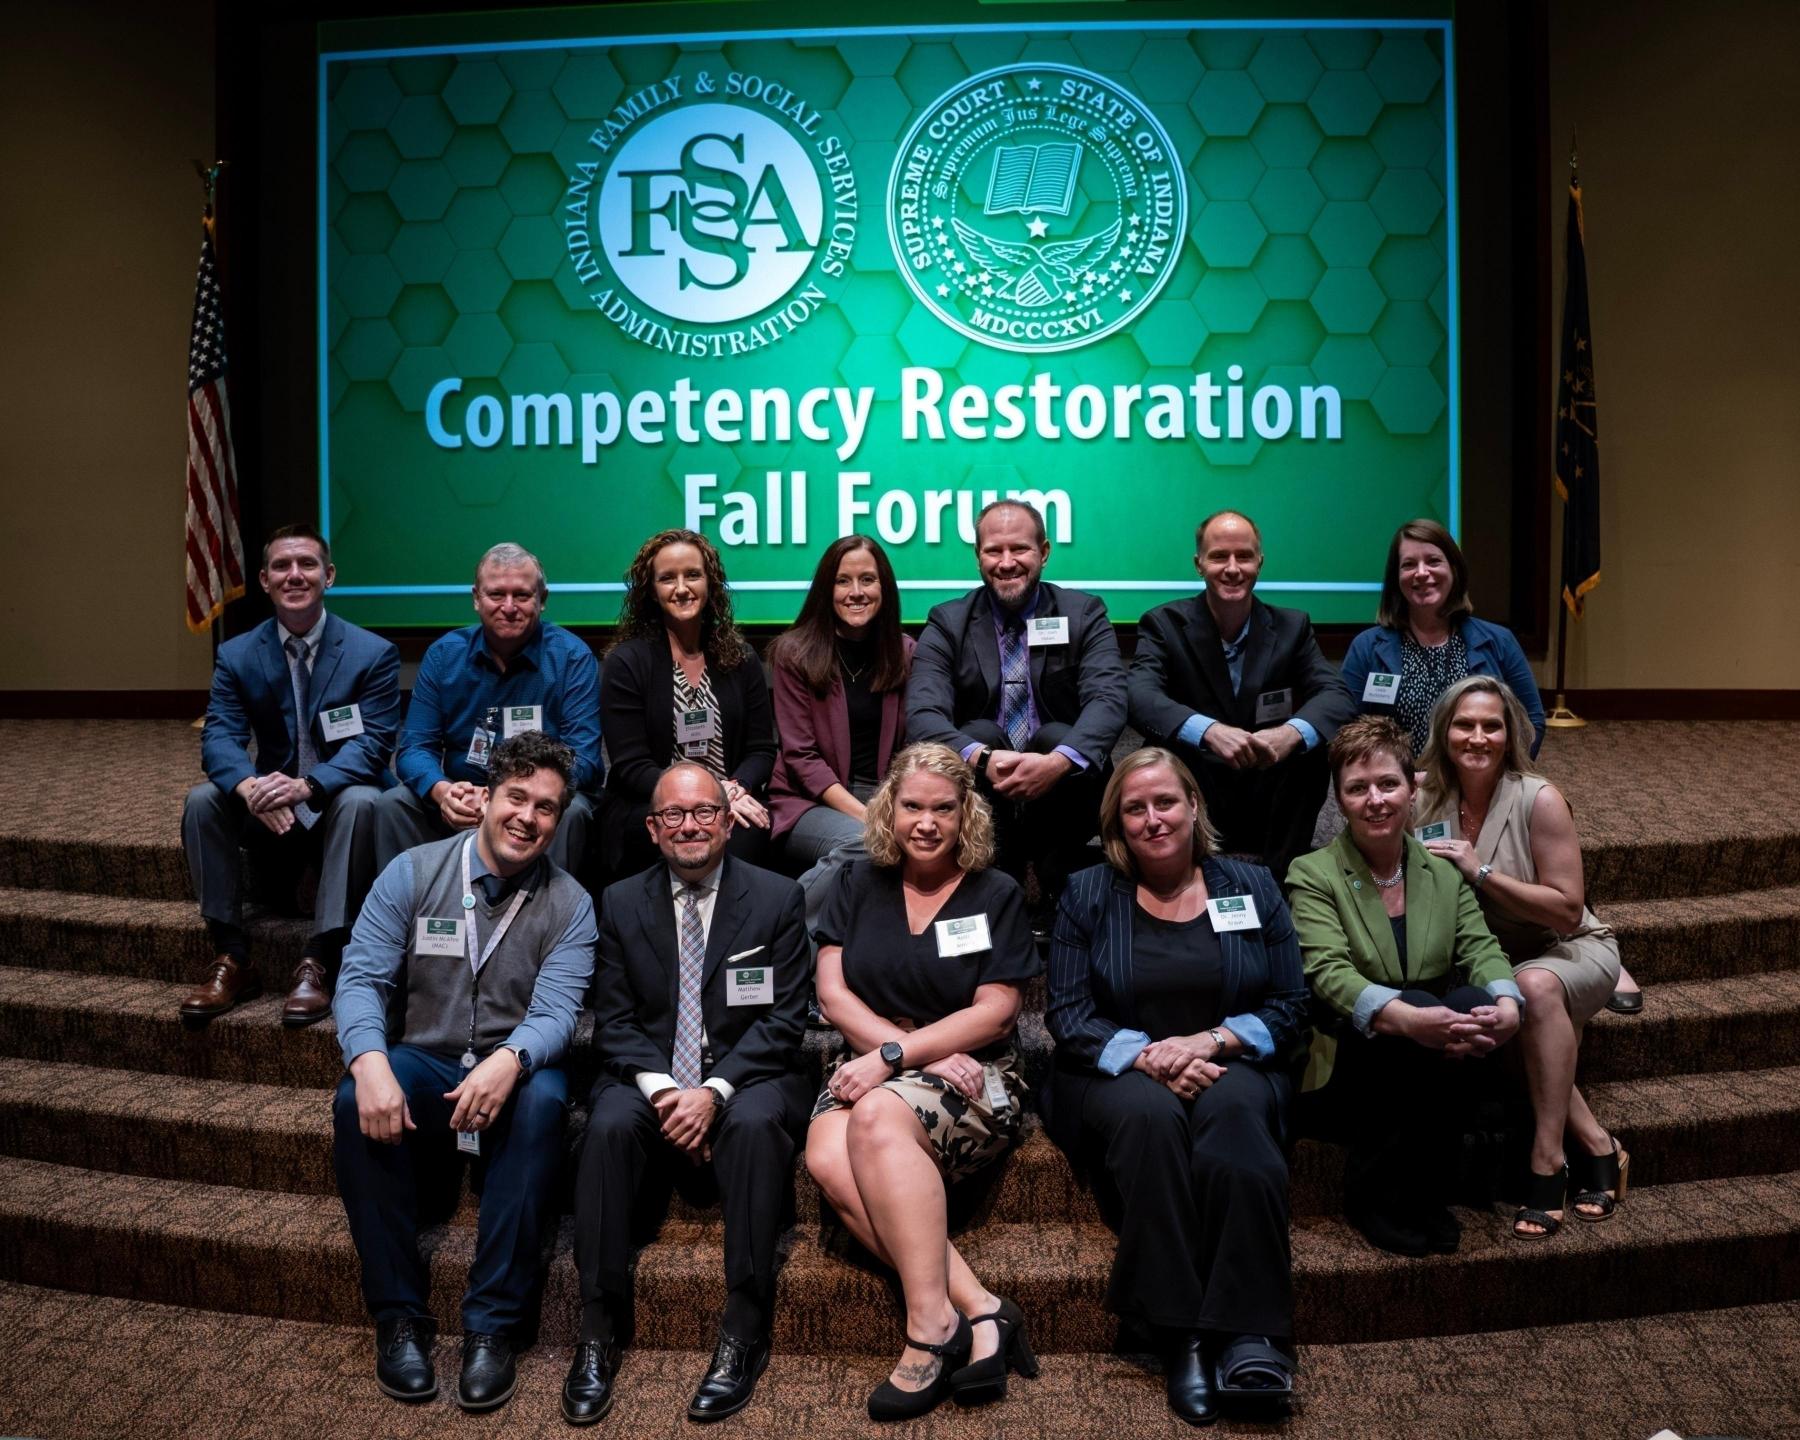 Team at Competency Restoration Fall Forum that wins award for 